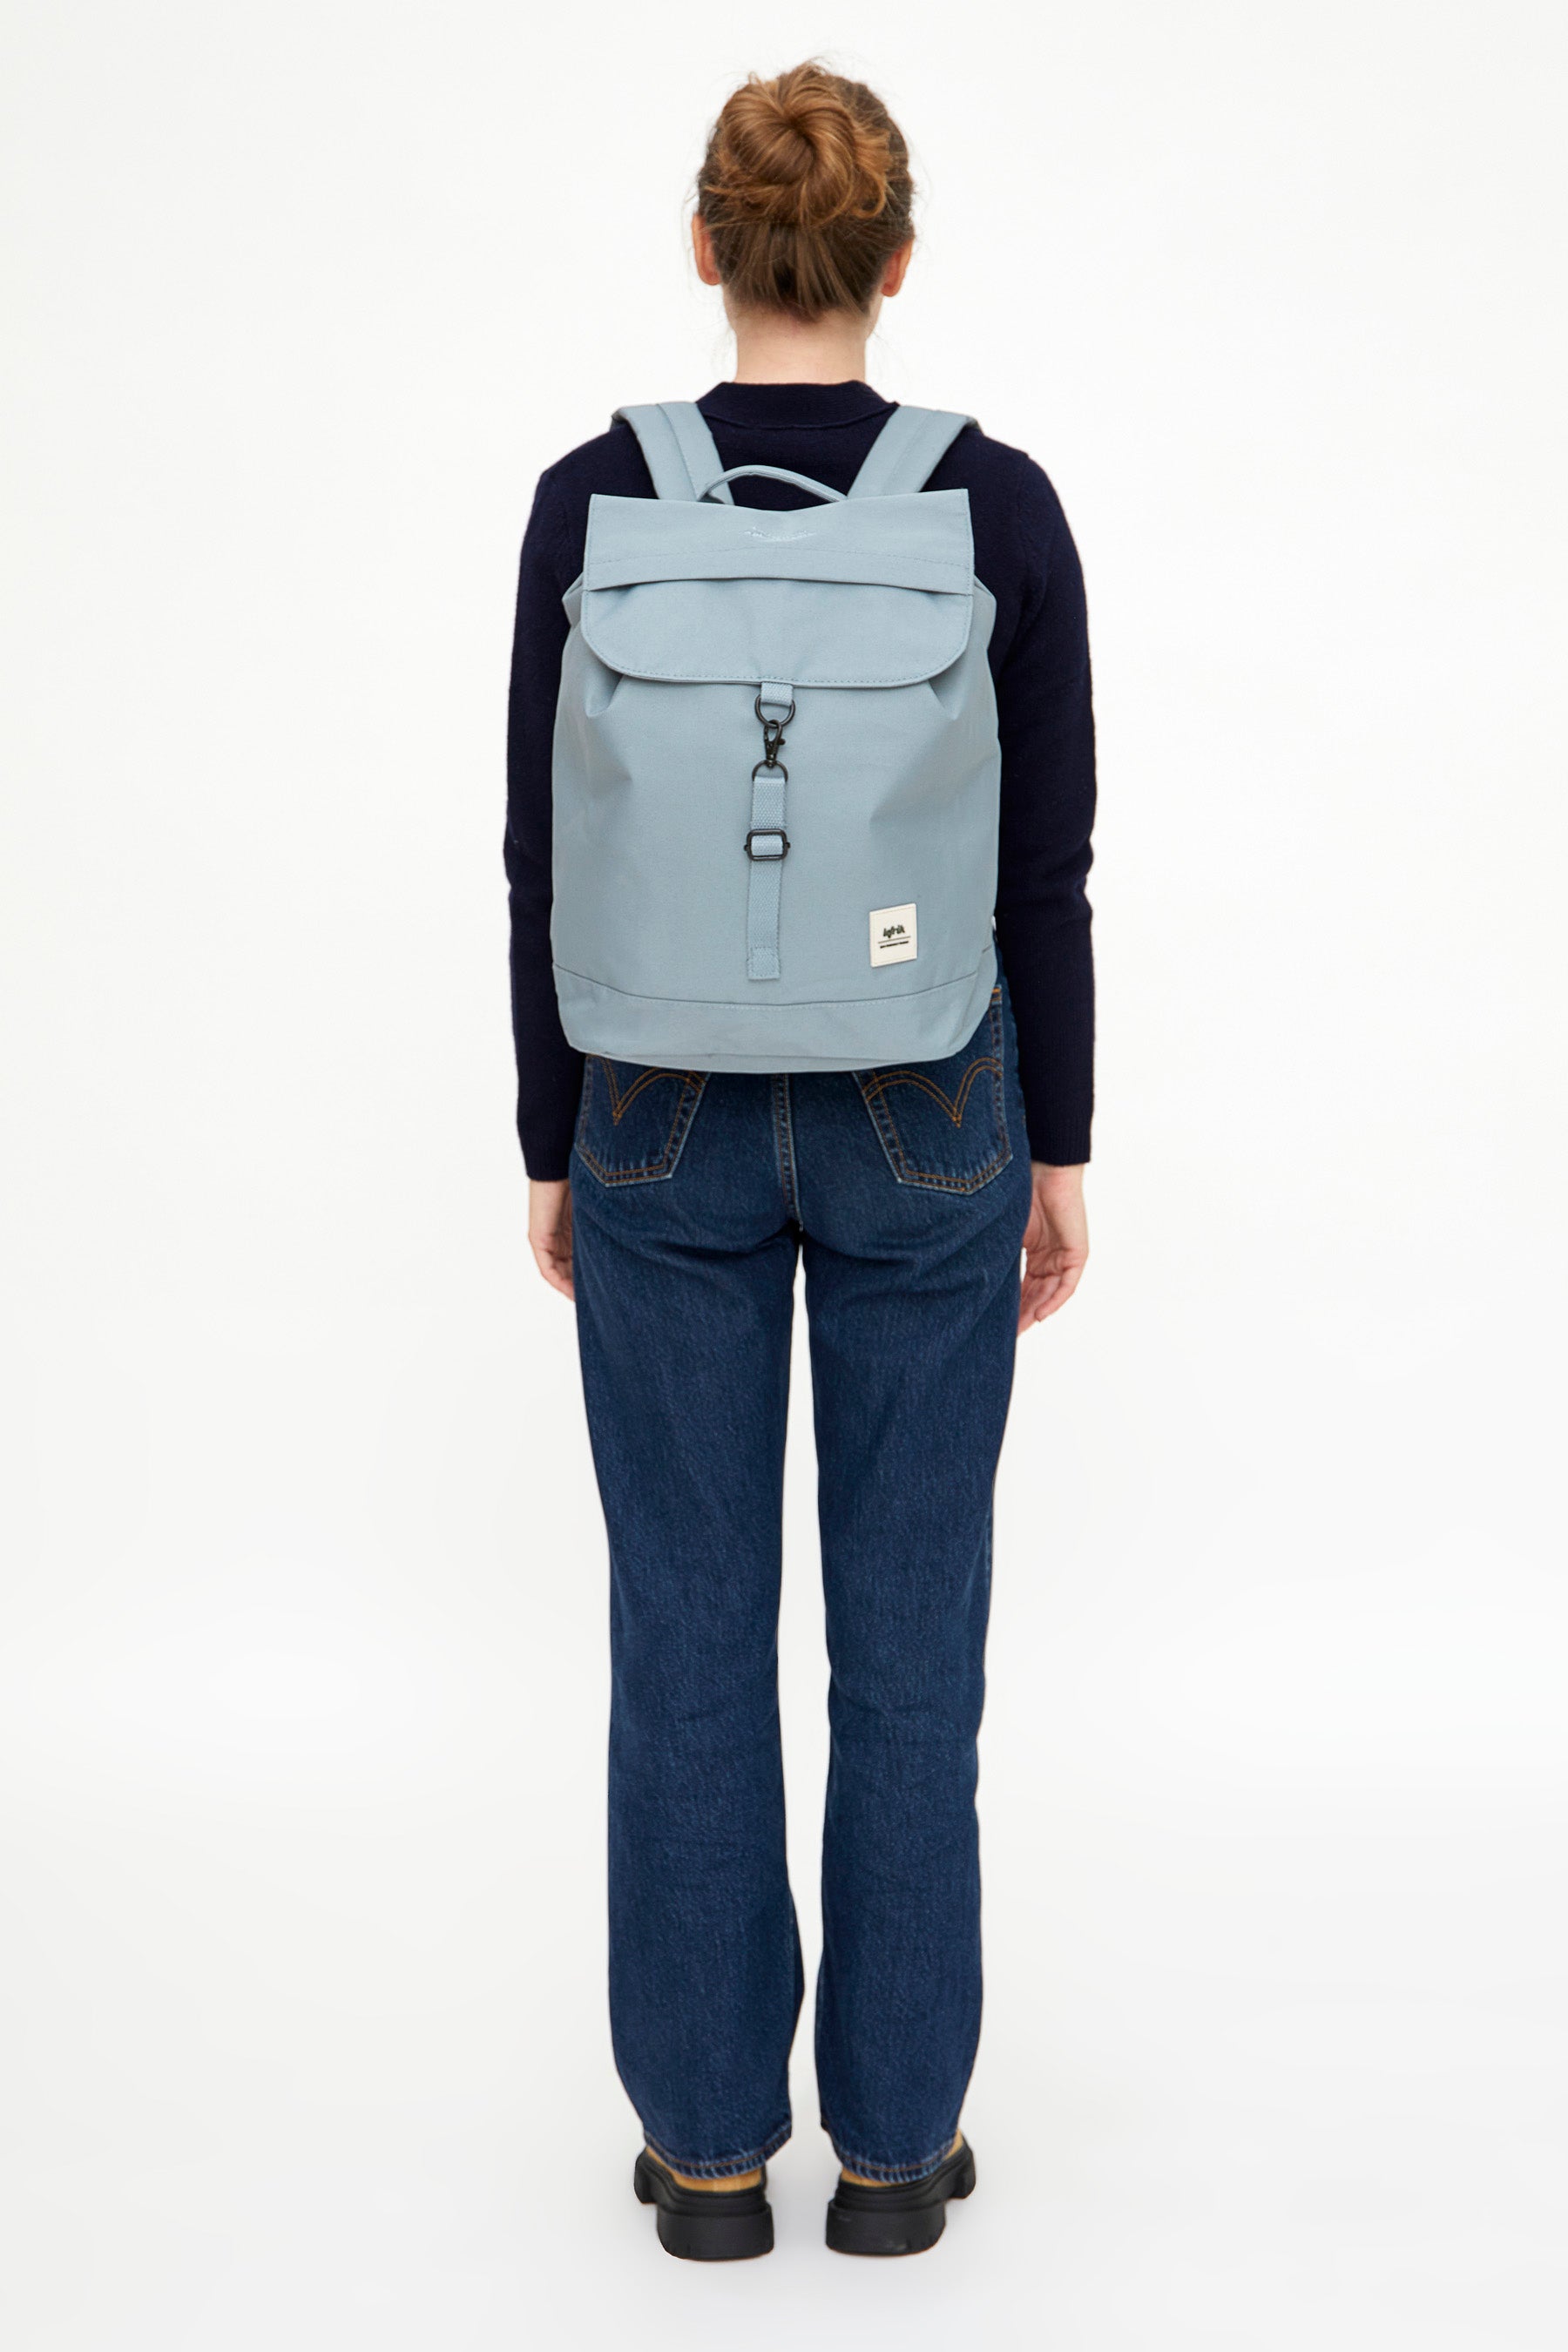 Light blue backpack Scout Metal (19l) made from recycled PET plastic bottles from Lefrik